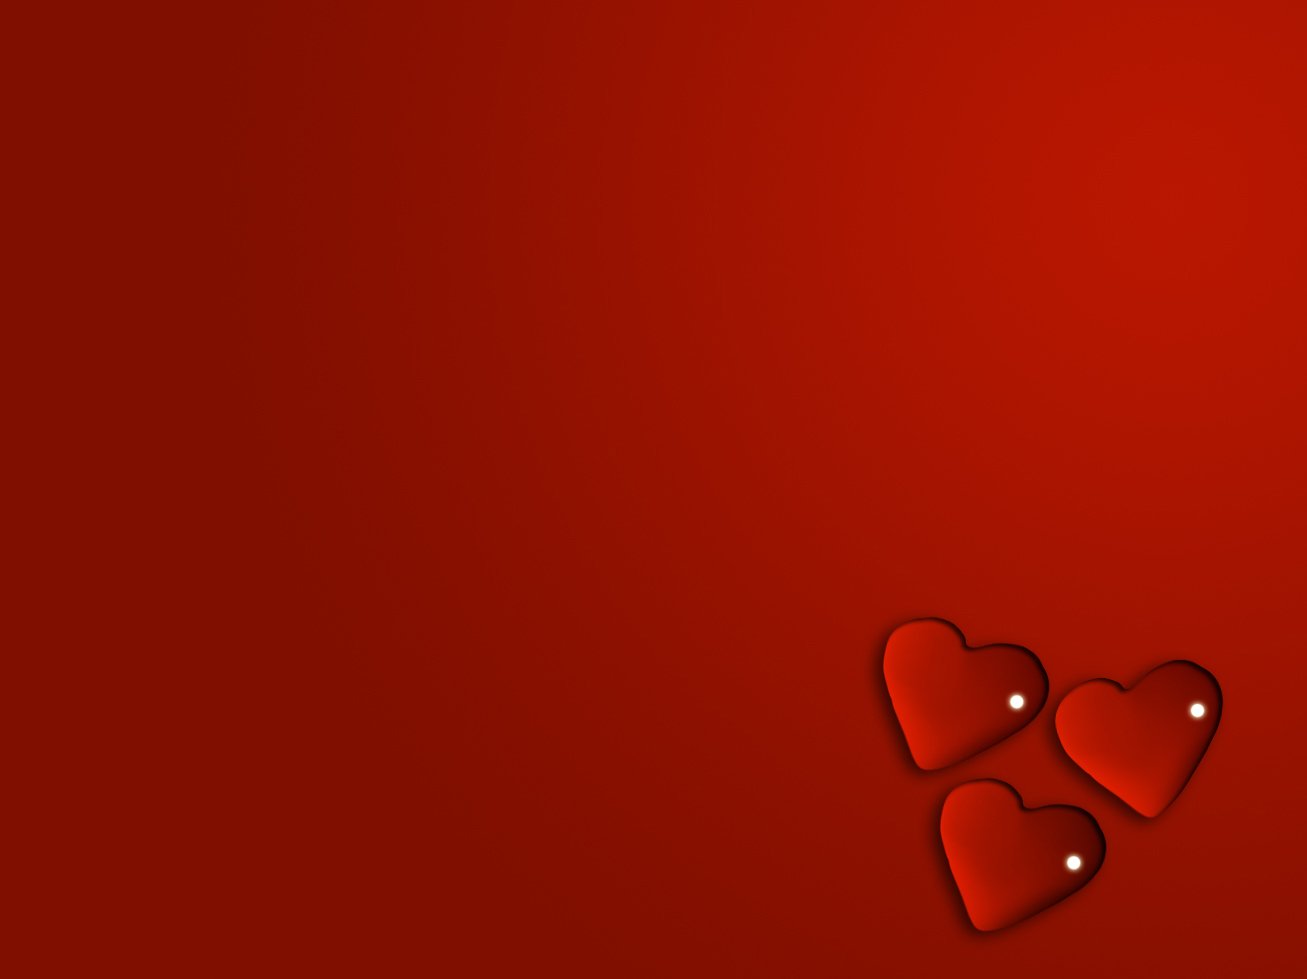 a red heart wallpaper with three hearts